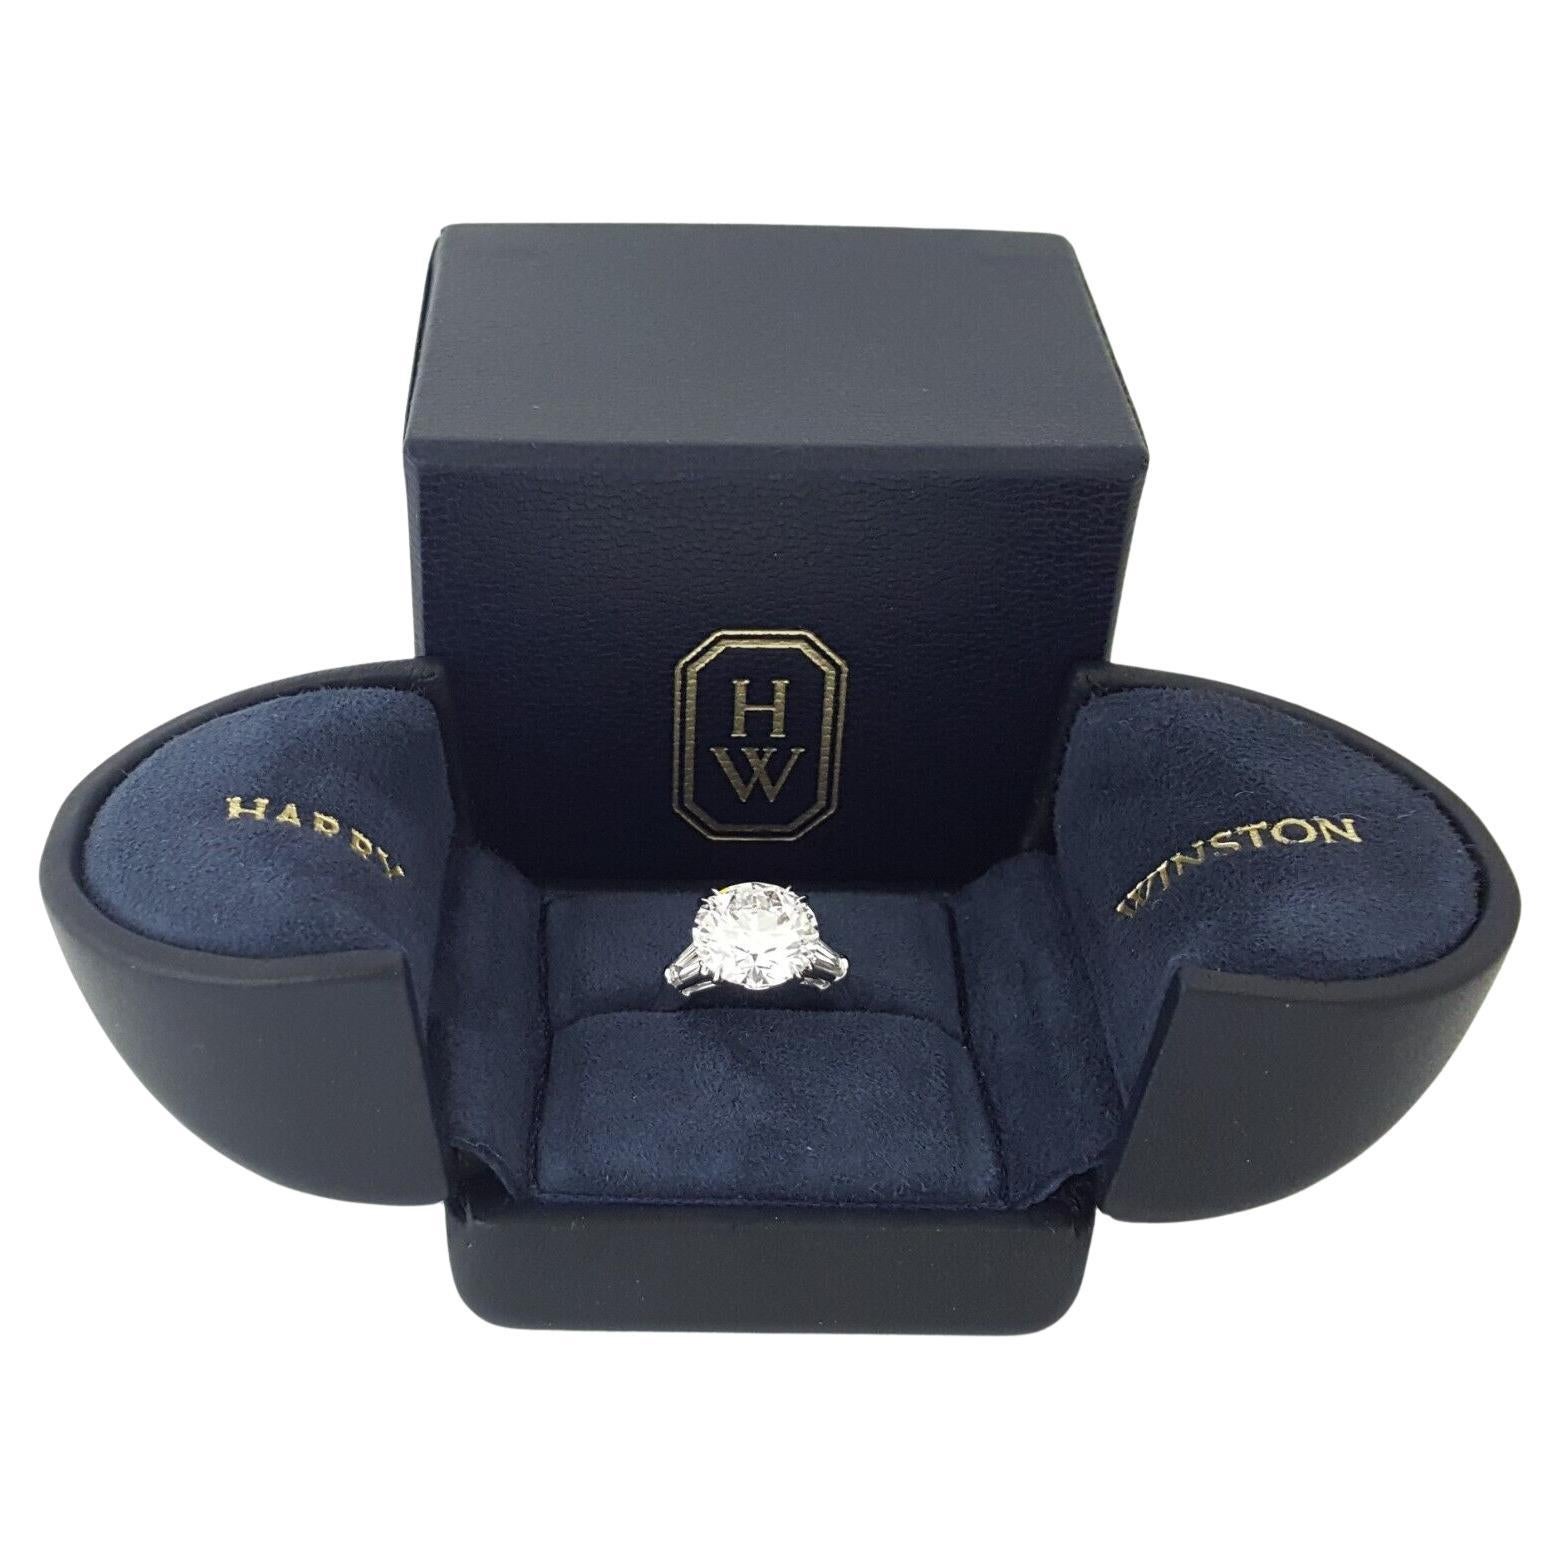 Introducing the timeless elegance of the Harry Winston 4.49 ct Total Weight Round Brilliant Cut with Tapered Baguette Diamond Platinum Engagement Ring. Crafted to perfection, this exquisite piece weighs 5 grams and is sized at 6.

At its heart lies